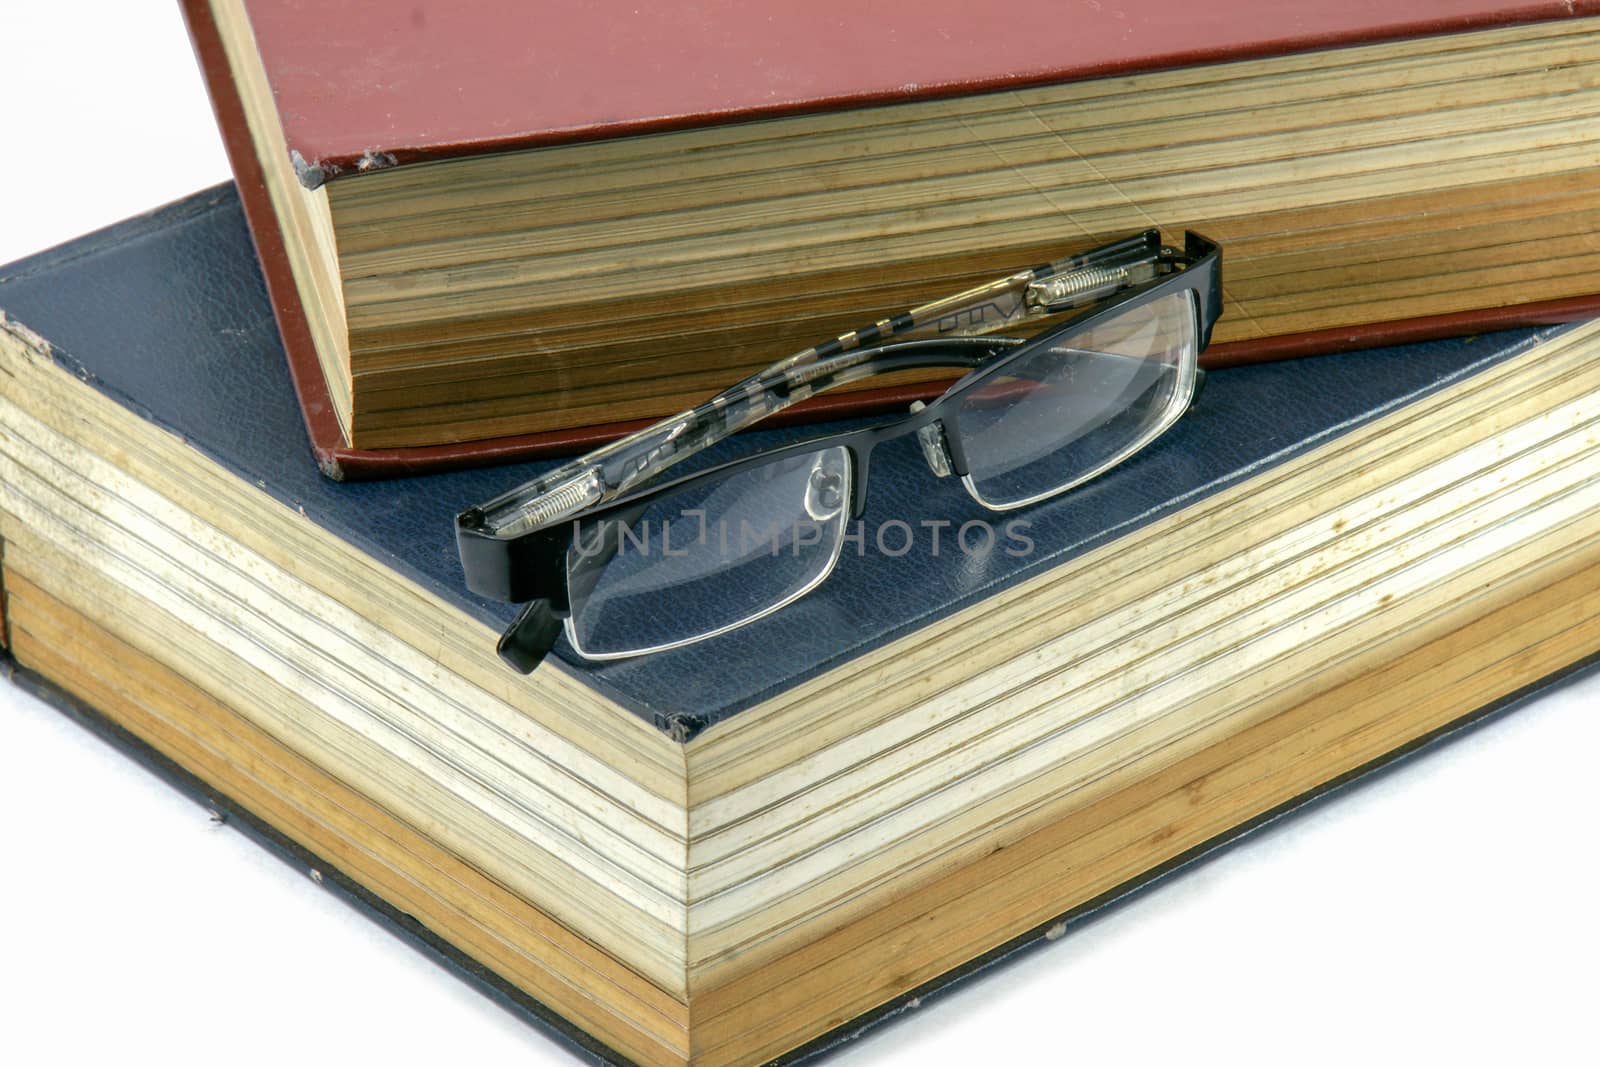 Old text books or bible with eyeglasses on them by mranucha